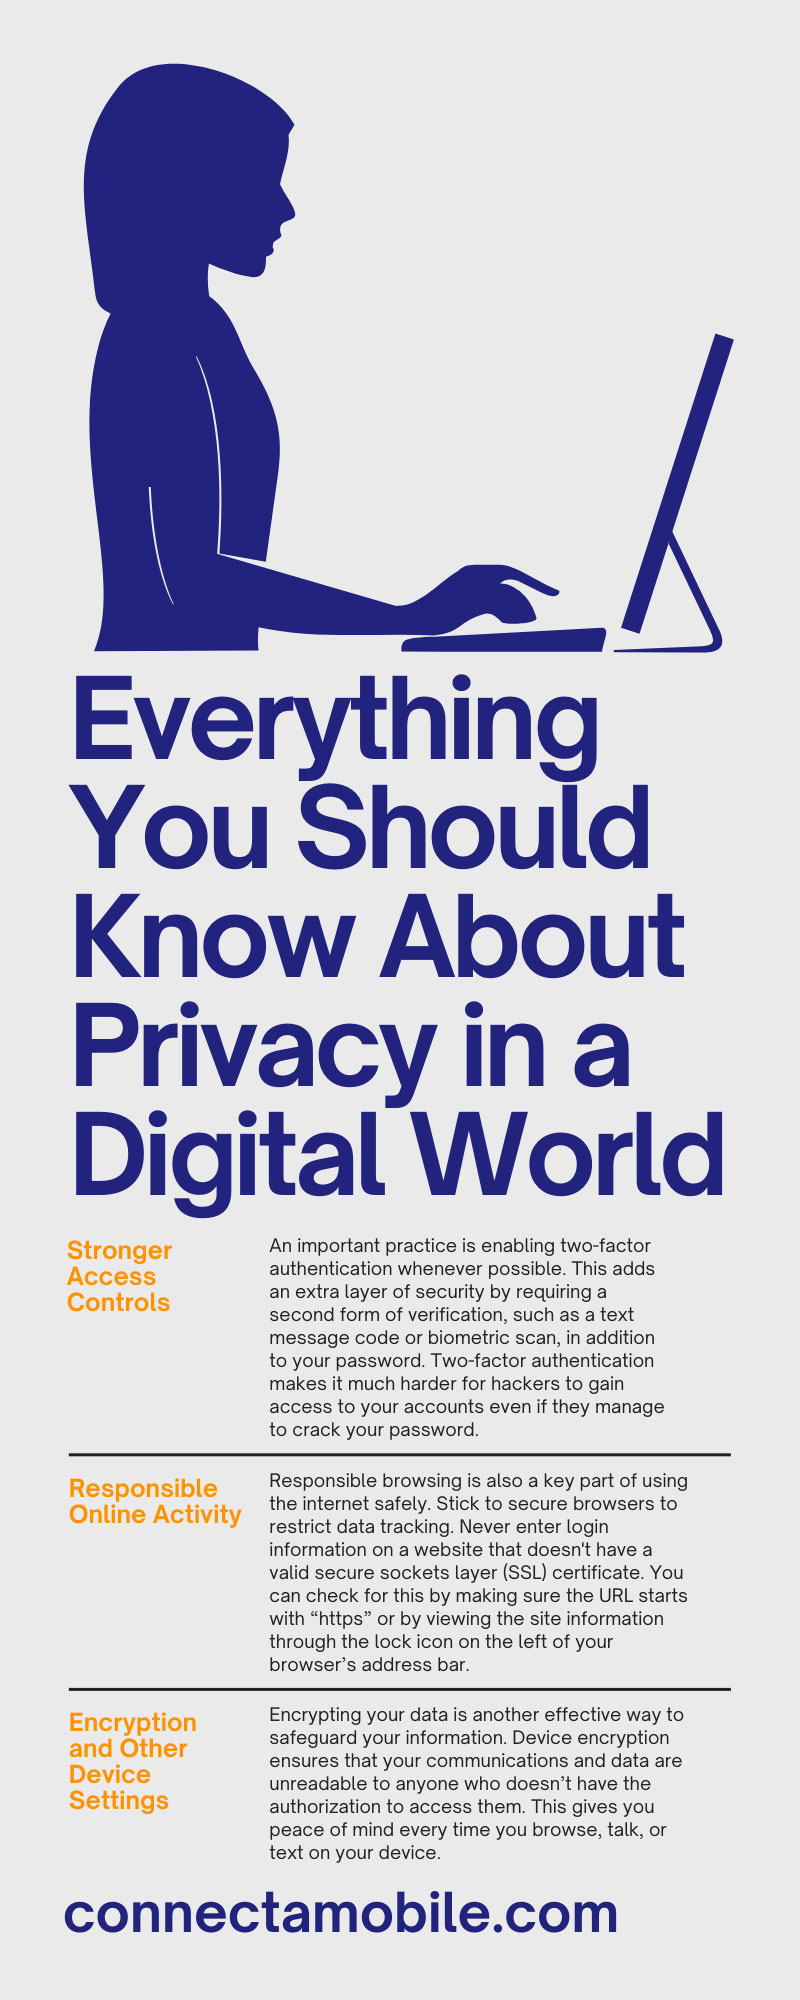 Everything You Should Know About Privacy in a Digital World